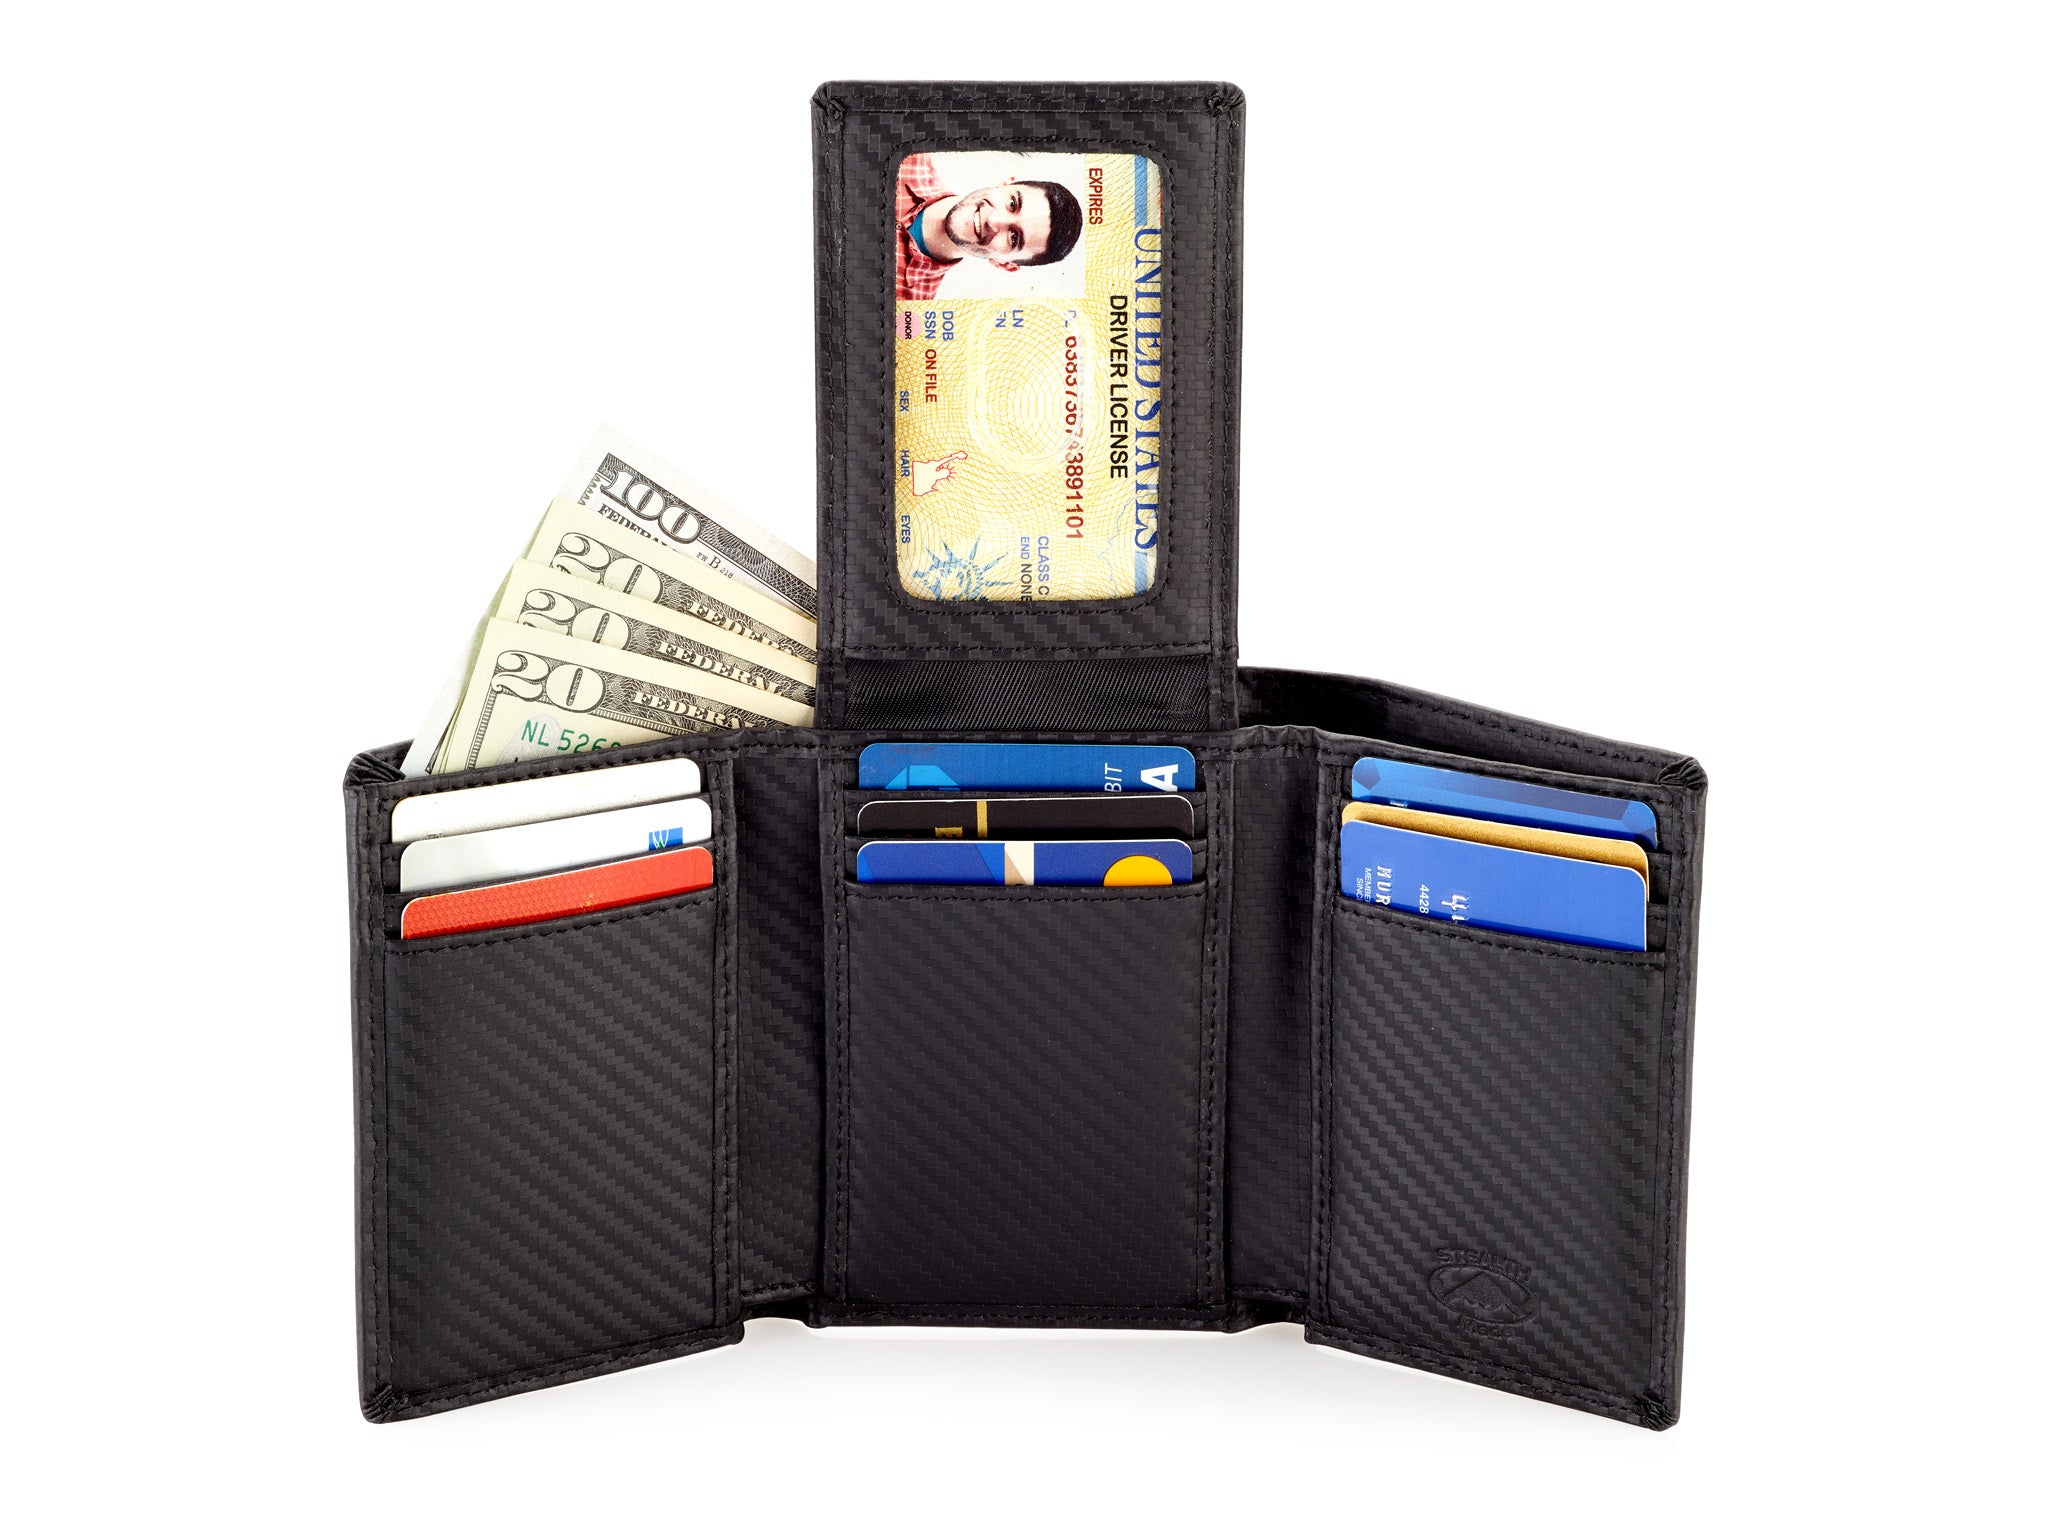 Buy Stealth Mode Trifold Leather Wallet for Men with ID Holder and RFID  Blocking (Black) at